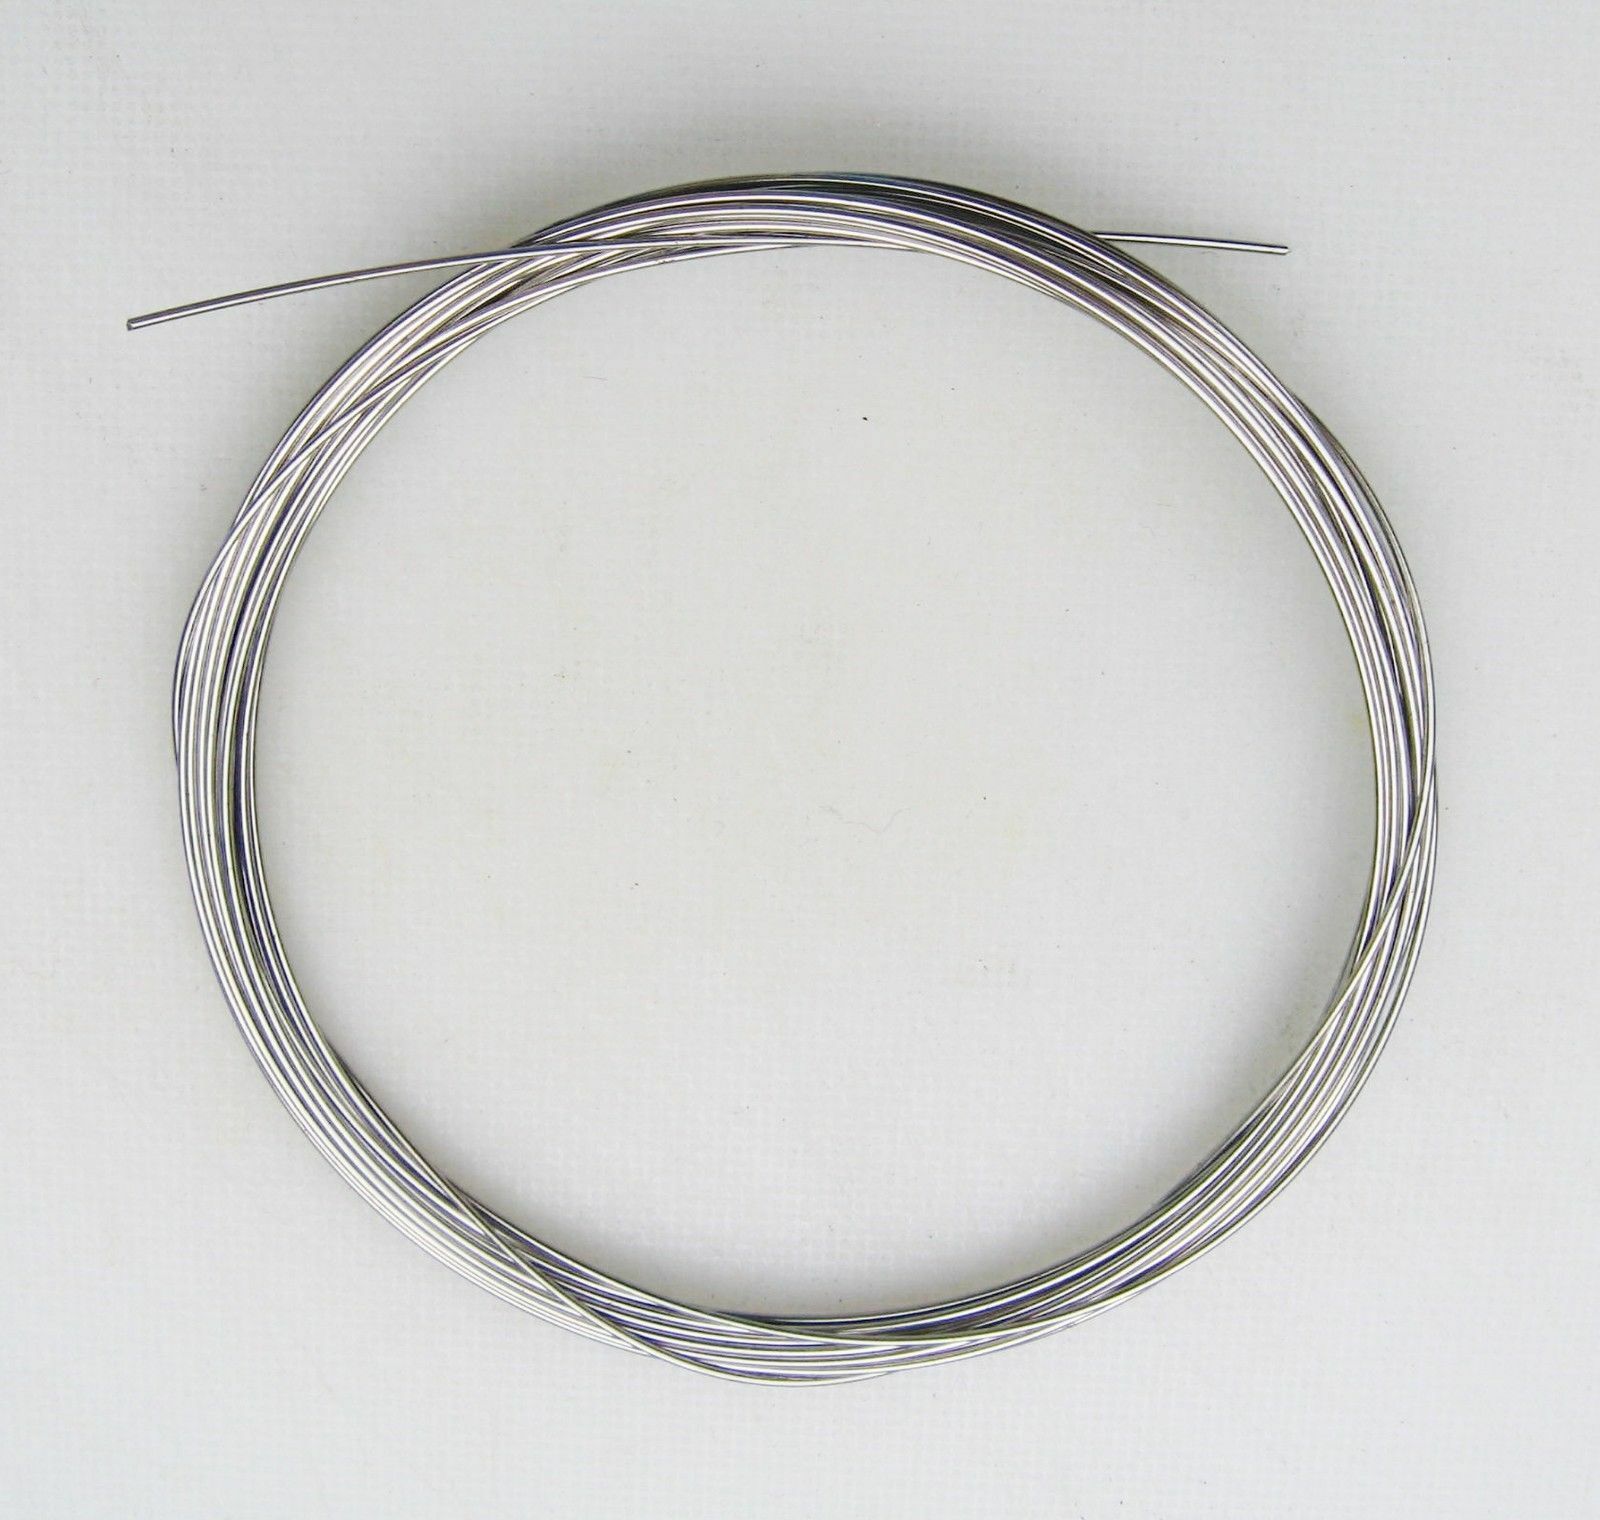 Clock Spring Wire - 10' Coil of Wire for making springs